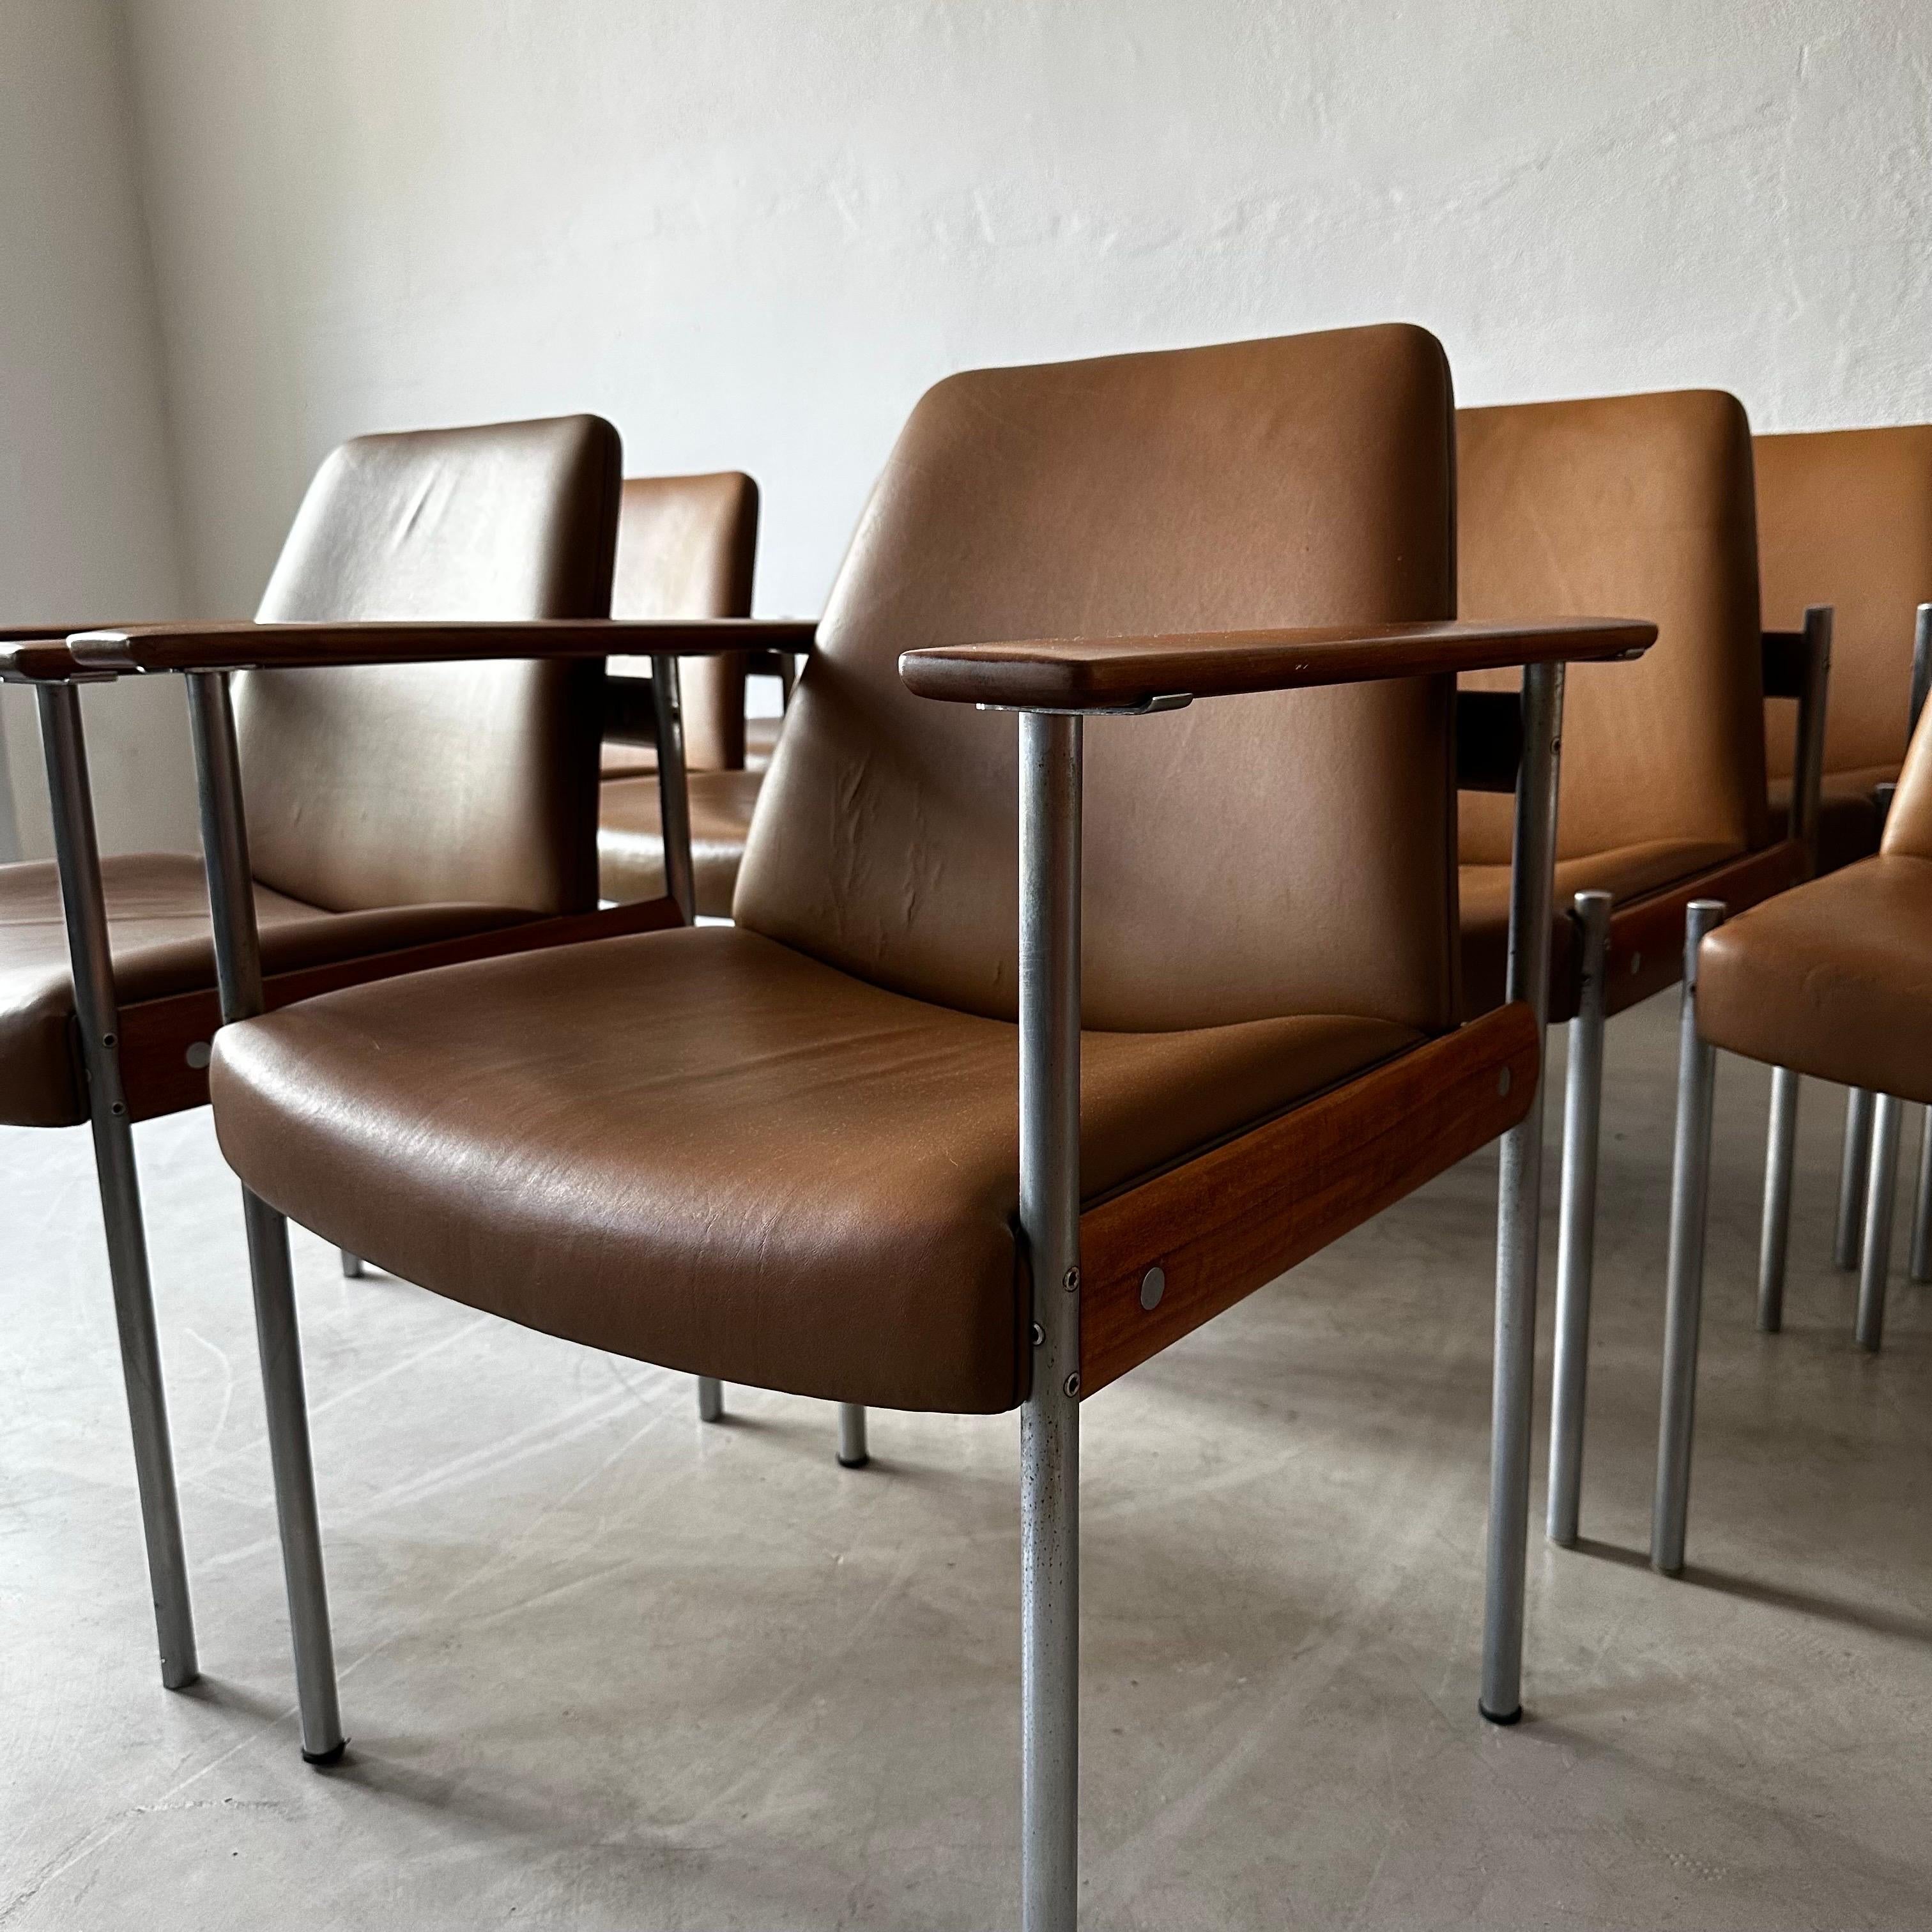 Sven Ivar Dysthe Large Set of 10 Chairs in Cognac Leather and Walnut For Sale 2